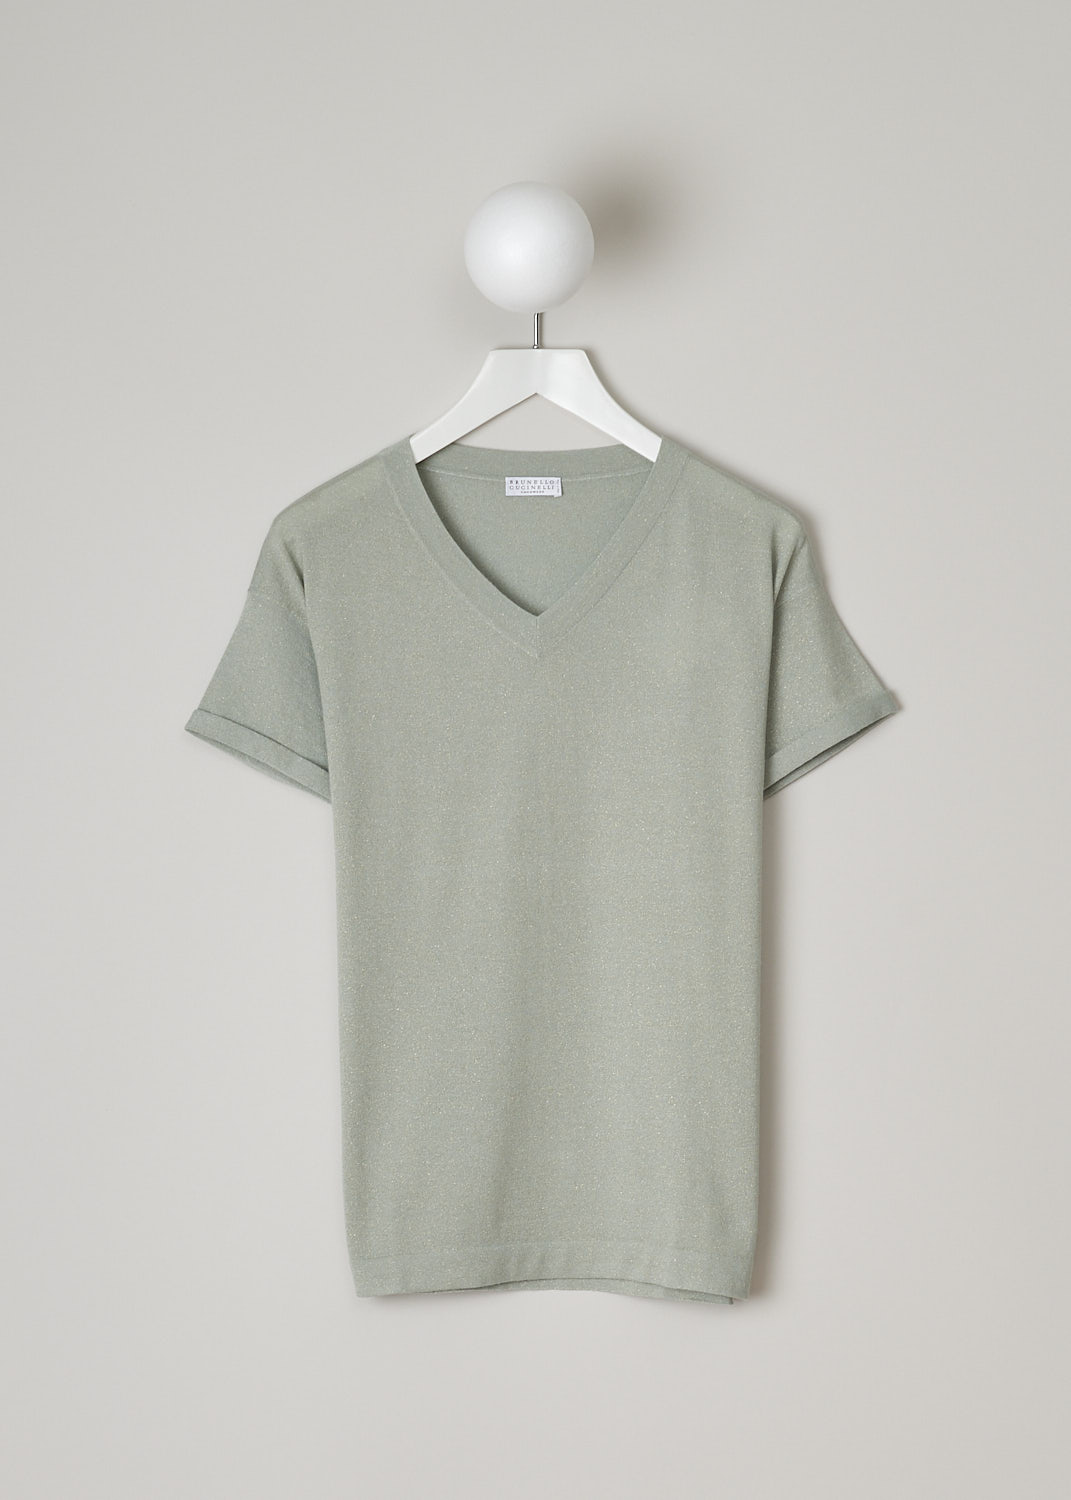 BRUNELLO CUCINELLI, PALE GREEN TOP WITH LUREX THREADING, M41810002_C2847, Green, Front, This pale green top has shimmering gold lurex threading throughout. The top has a ribbed V-neckline and short sleeves with a rolled up hem.  
